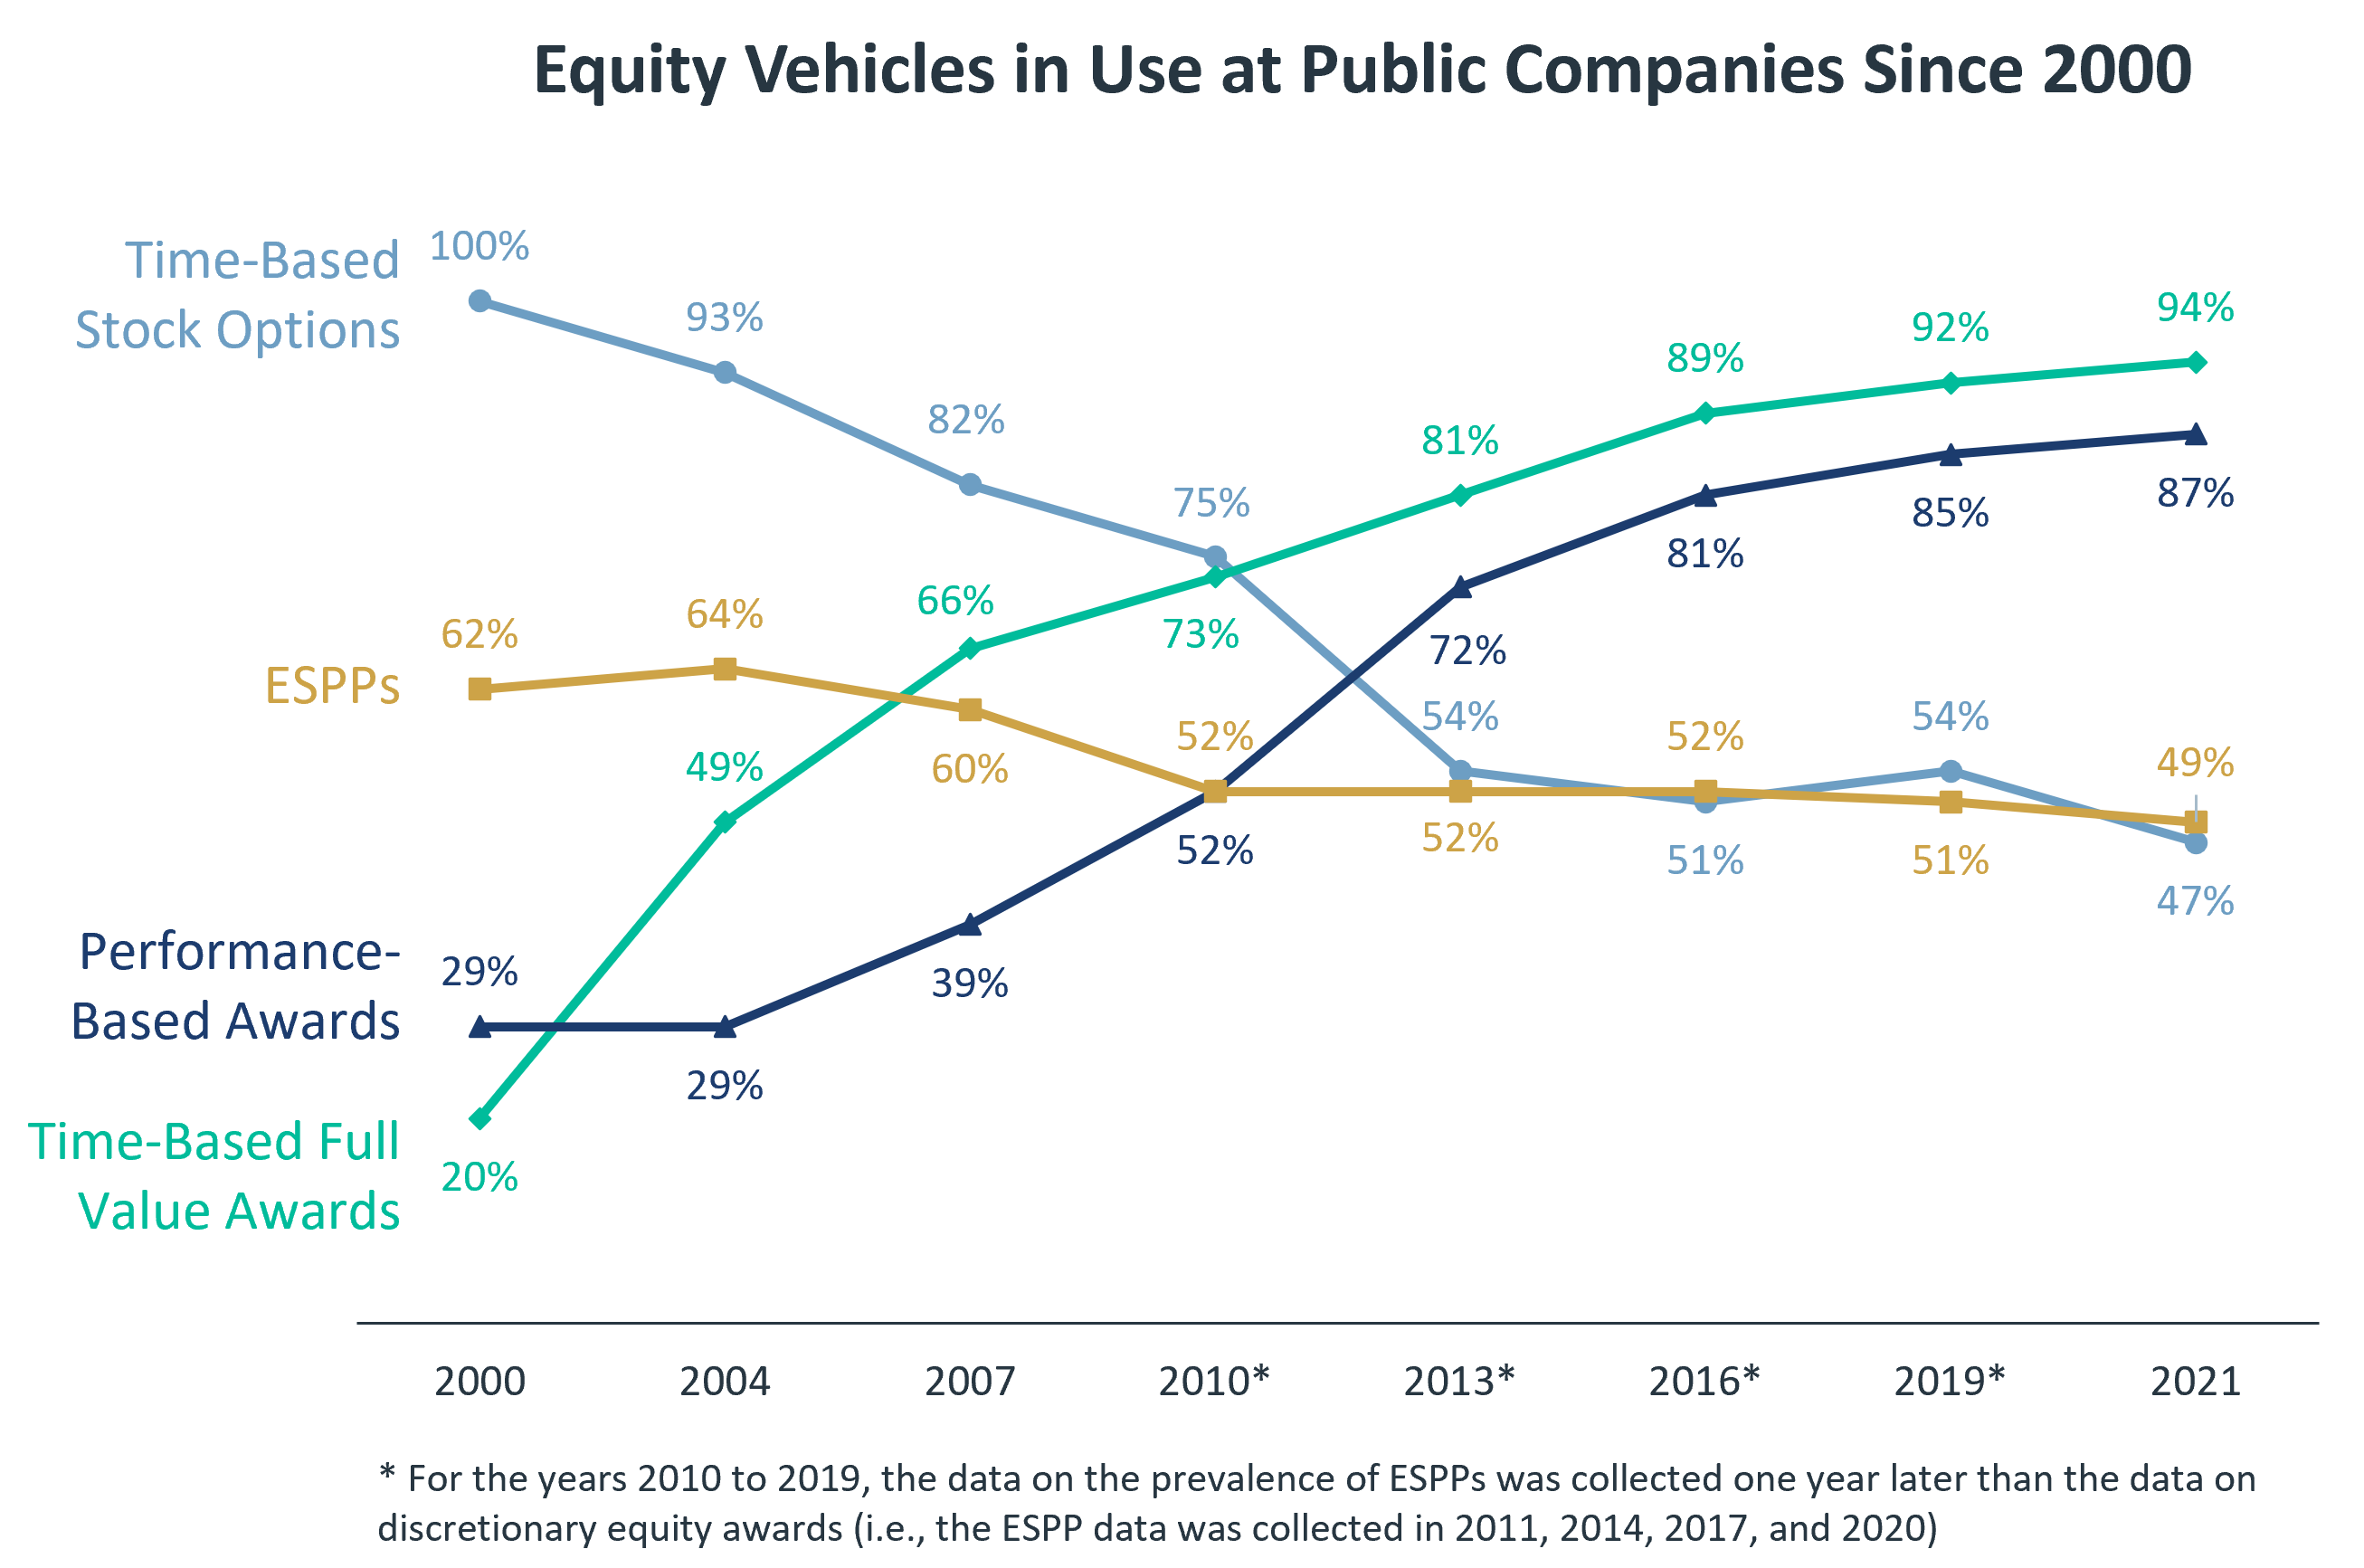 Chart showing how equity vehicle usage a public companies has changed over the past 20 years